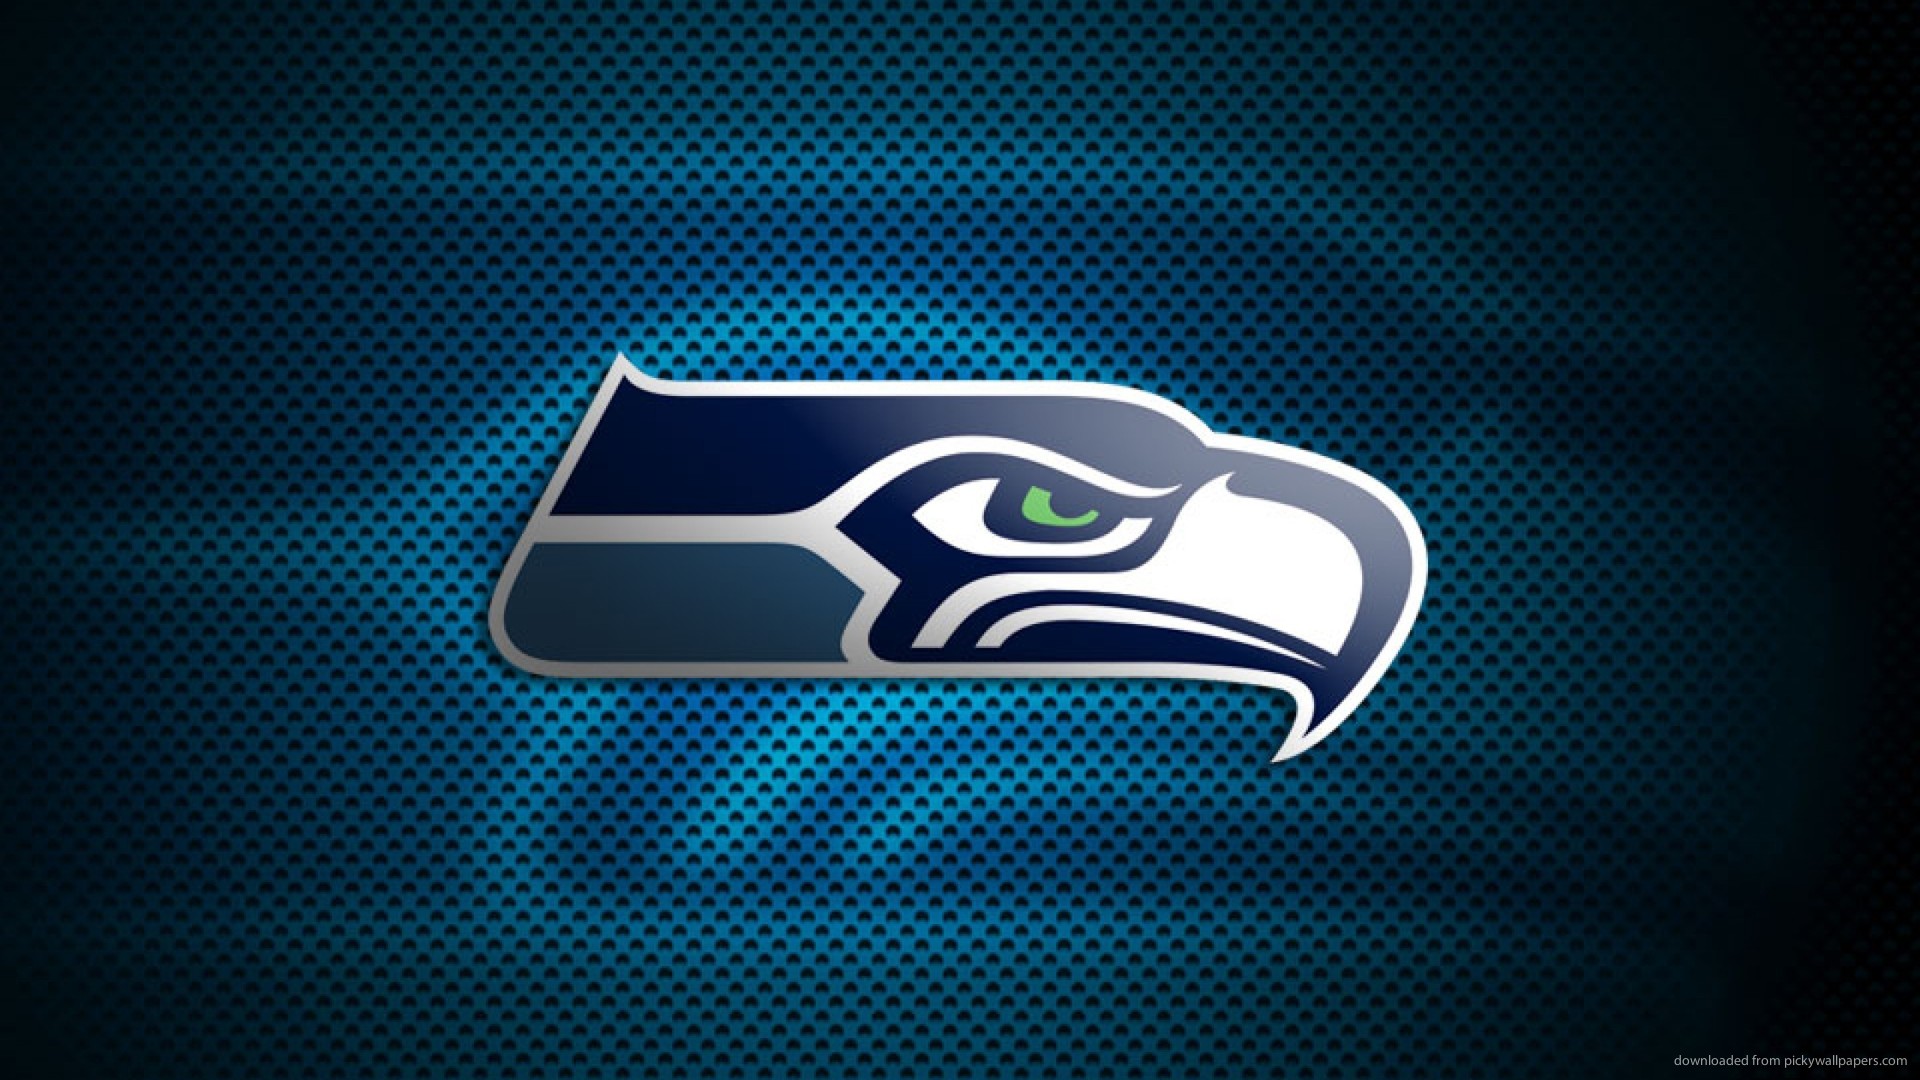 Seattle Seahawks Picture For iPhone Blackberry iPad